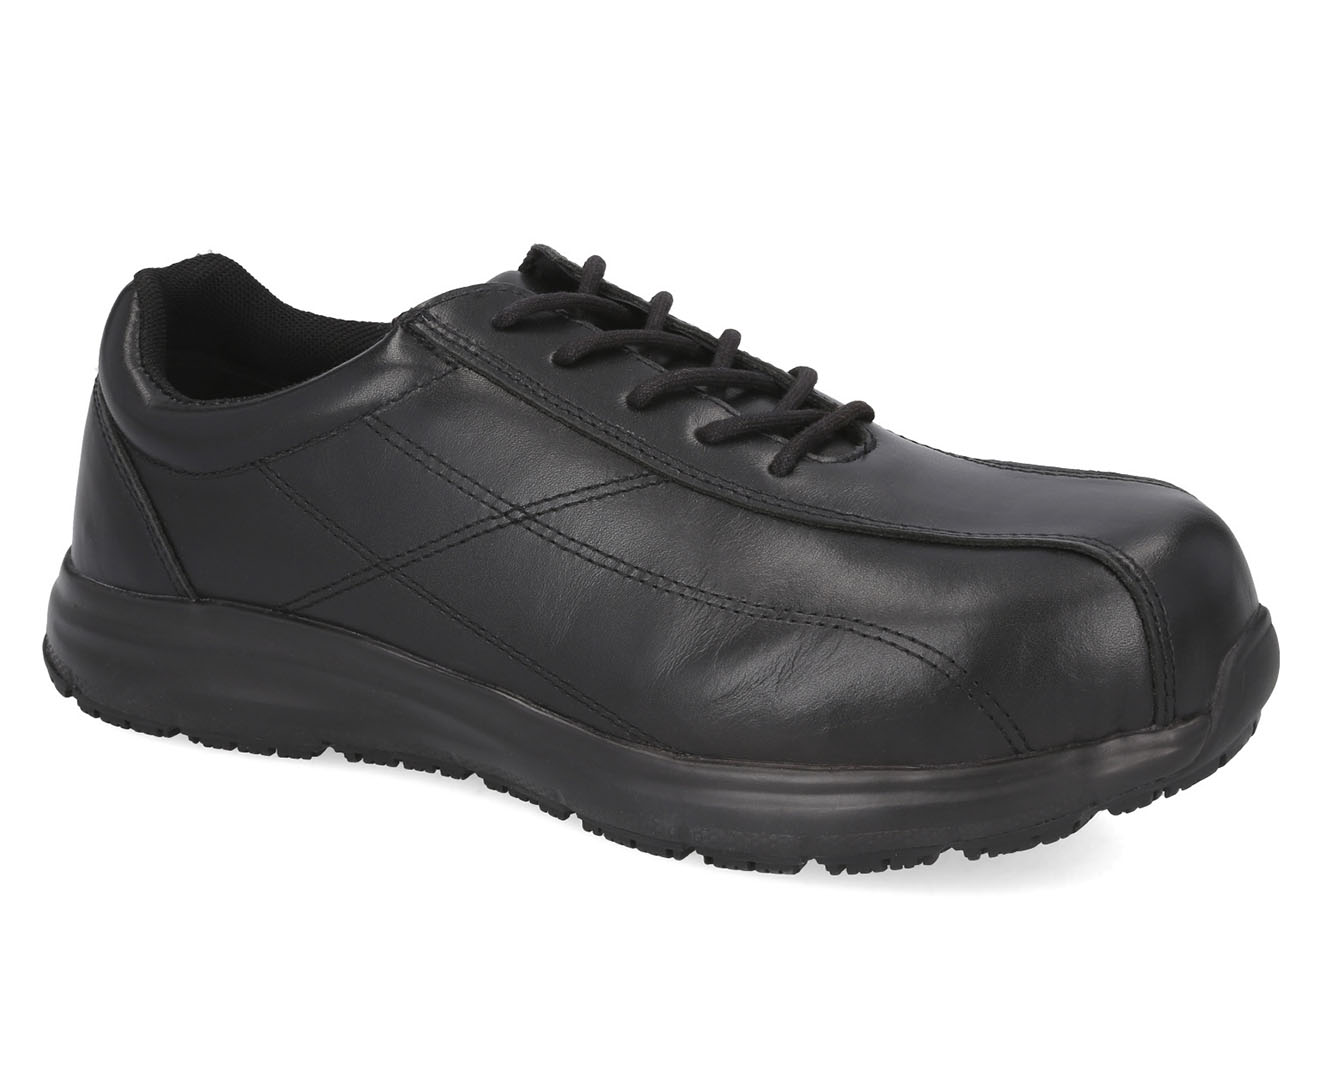 Bata Women's Low Cut Slip Resistant Piper AT Safety Shoes - Black ...